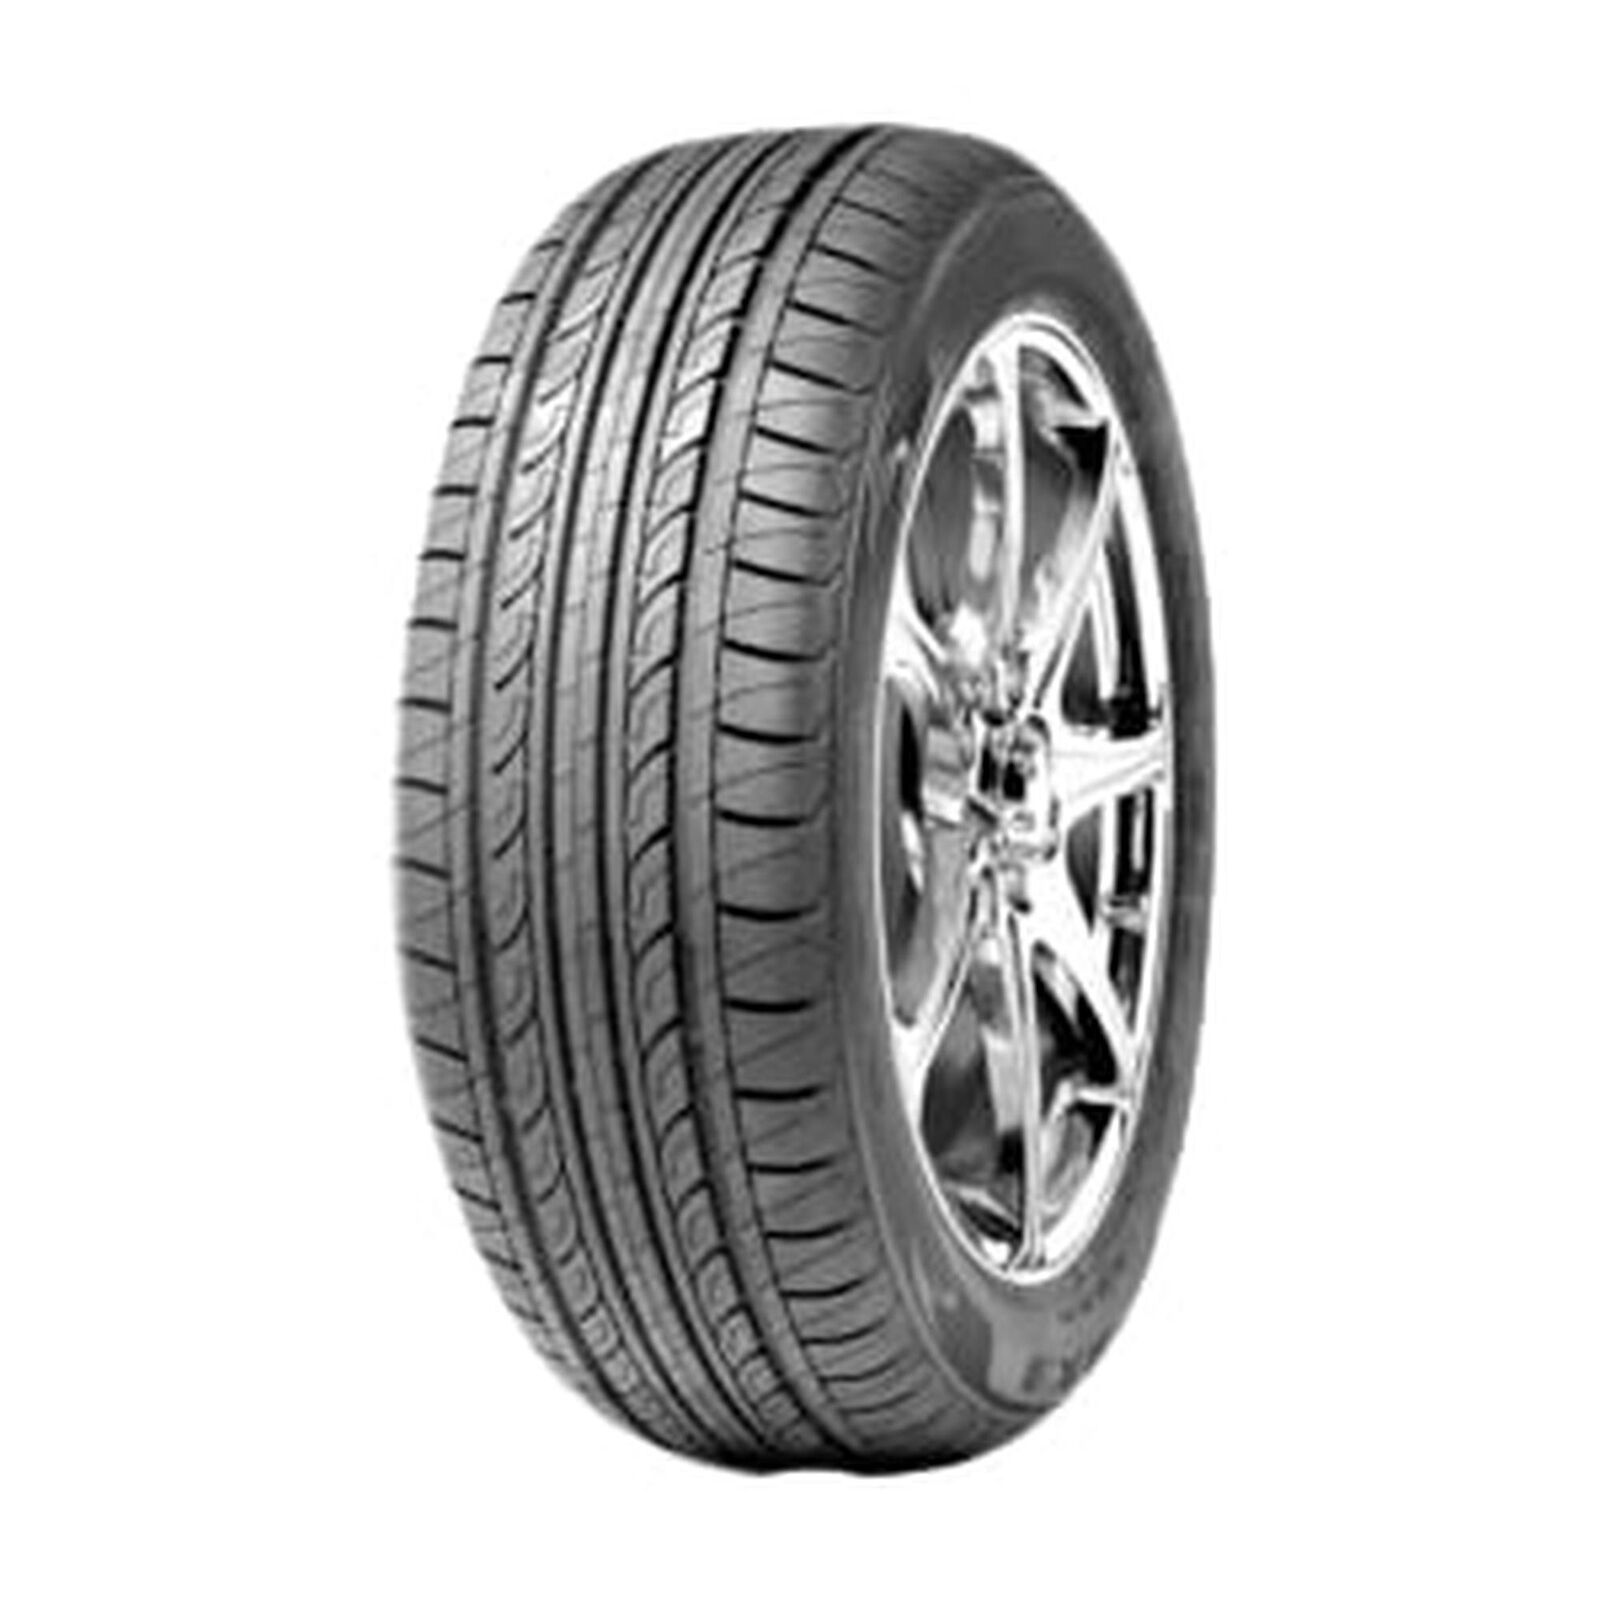 4 New Ardent Hp Rx3  - 185/55r15 Tires 1855515 185 55 15